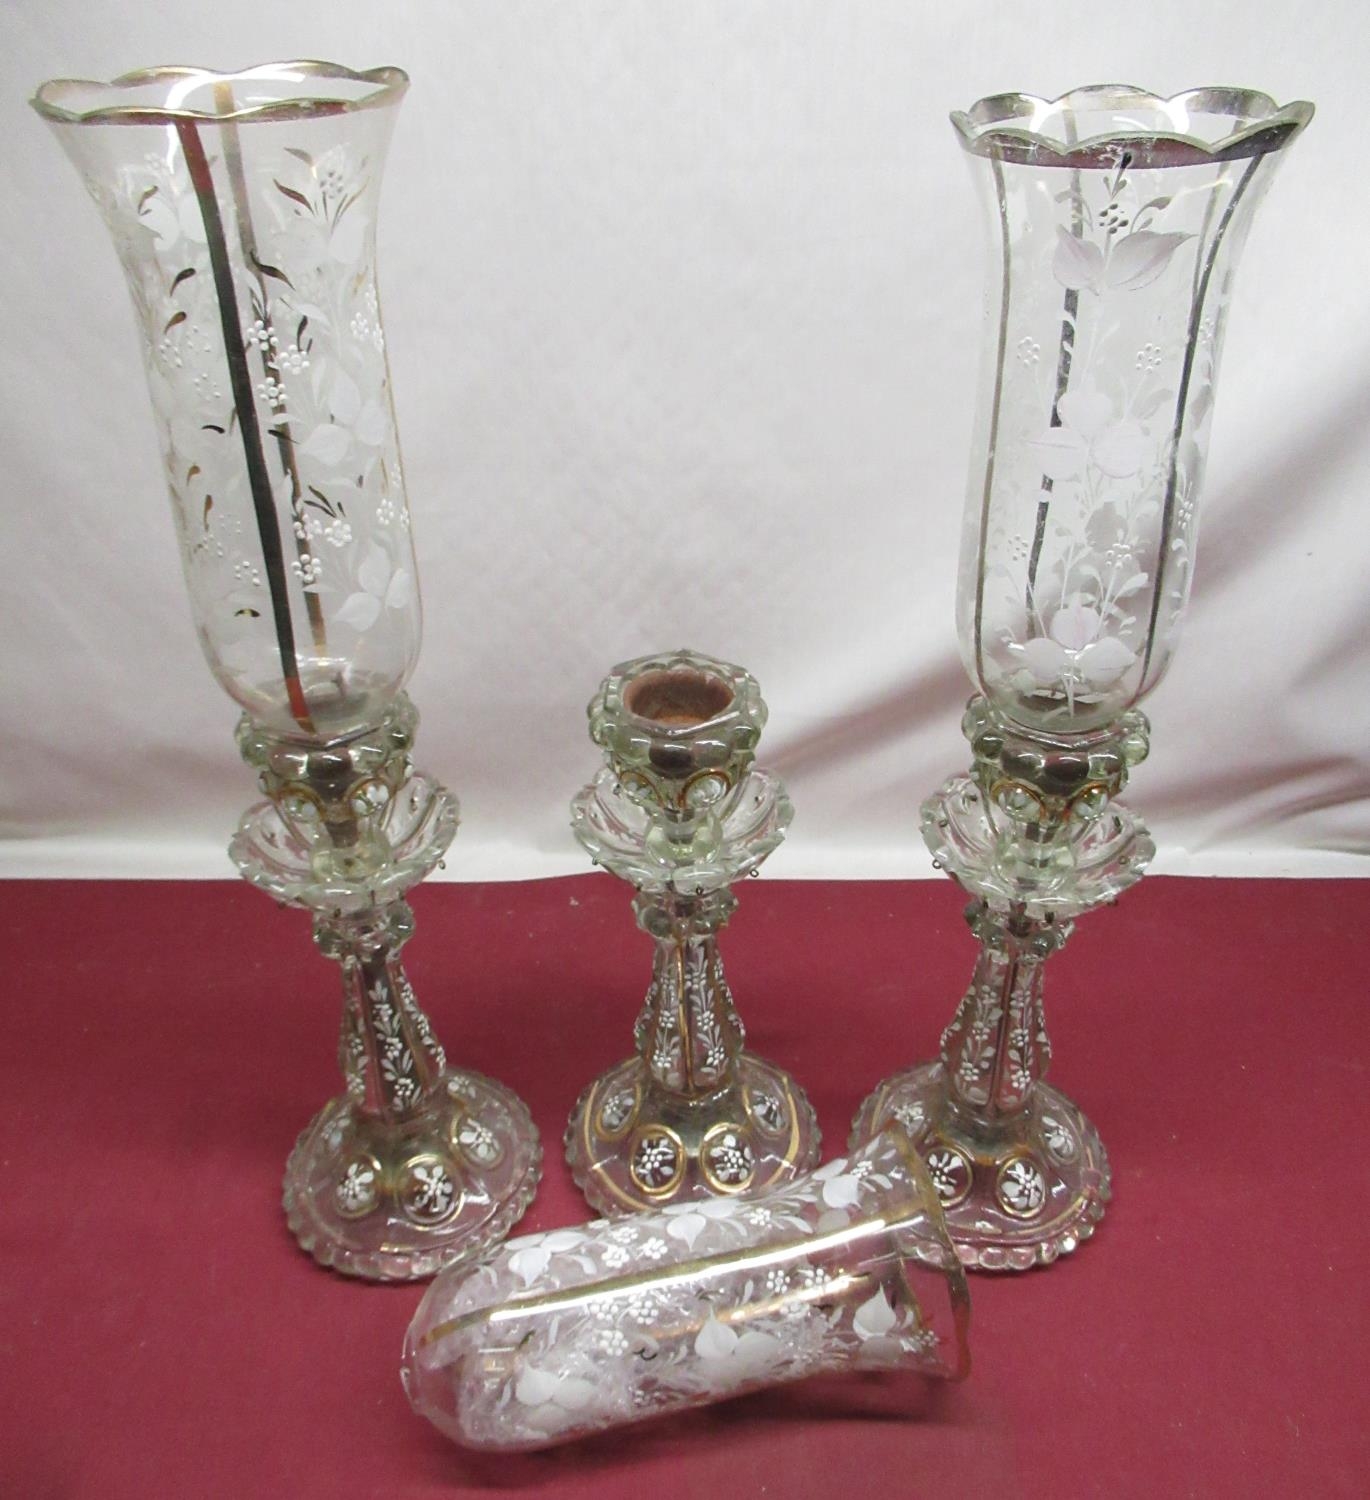 Late C19th glass candle lamp lustres painted in floral enamels with matching funnel shades (